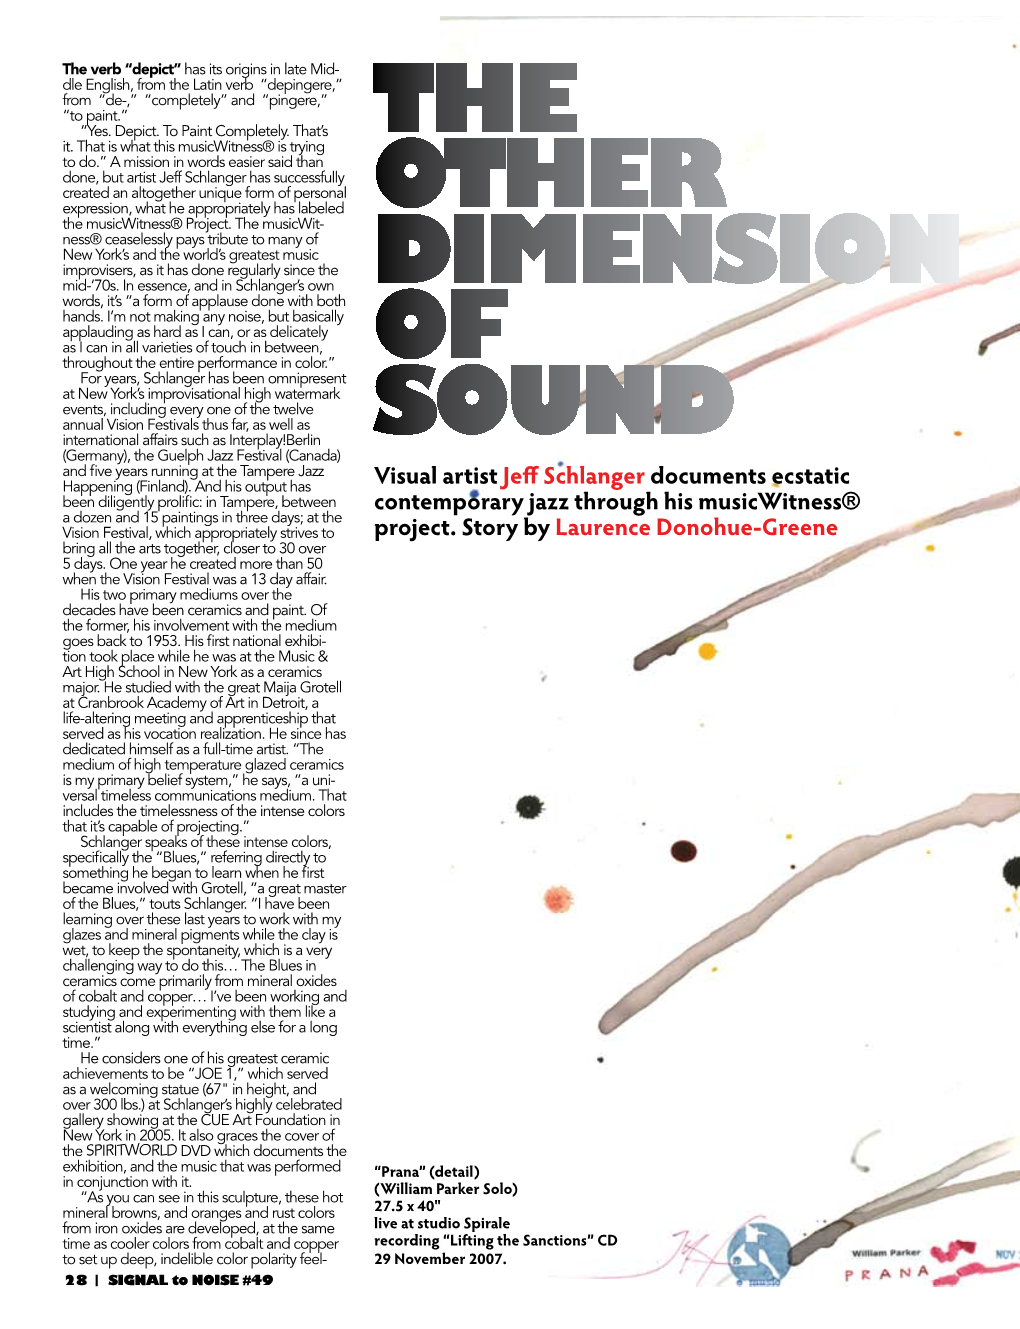 The Other Dimension of Sound